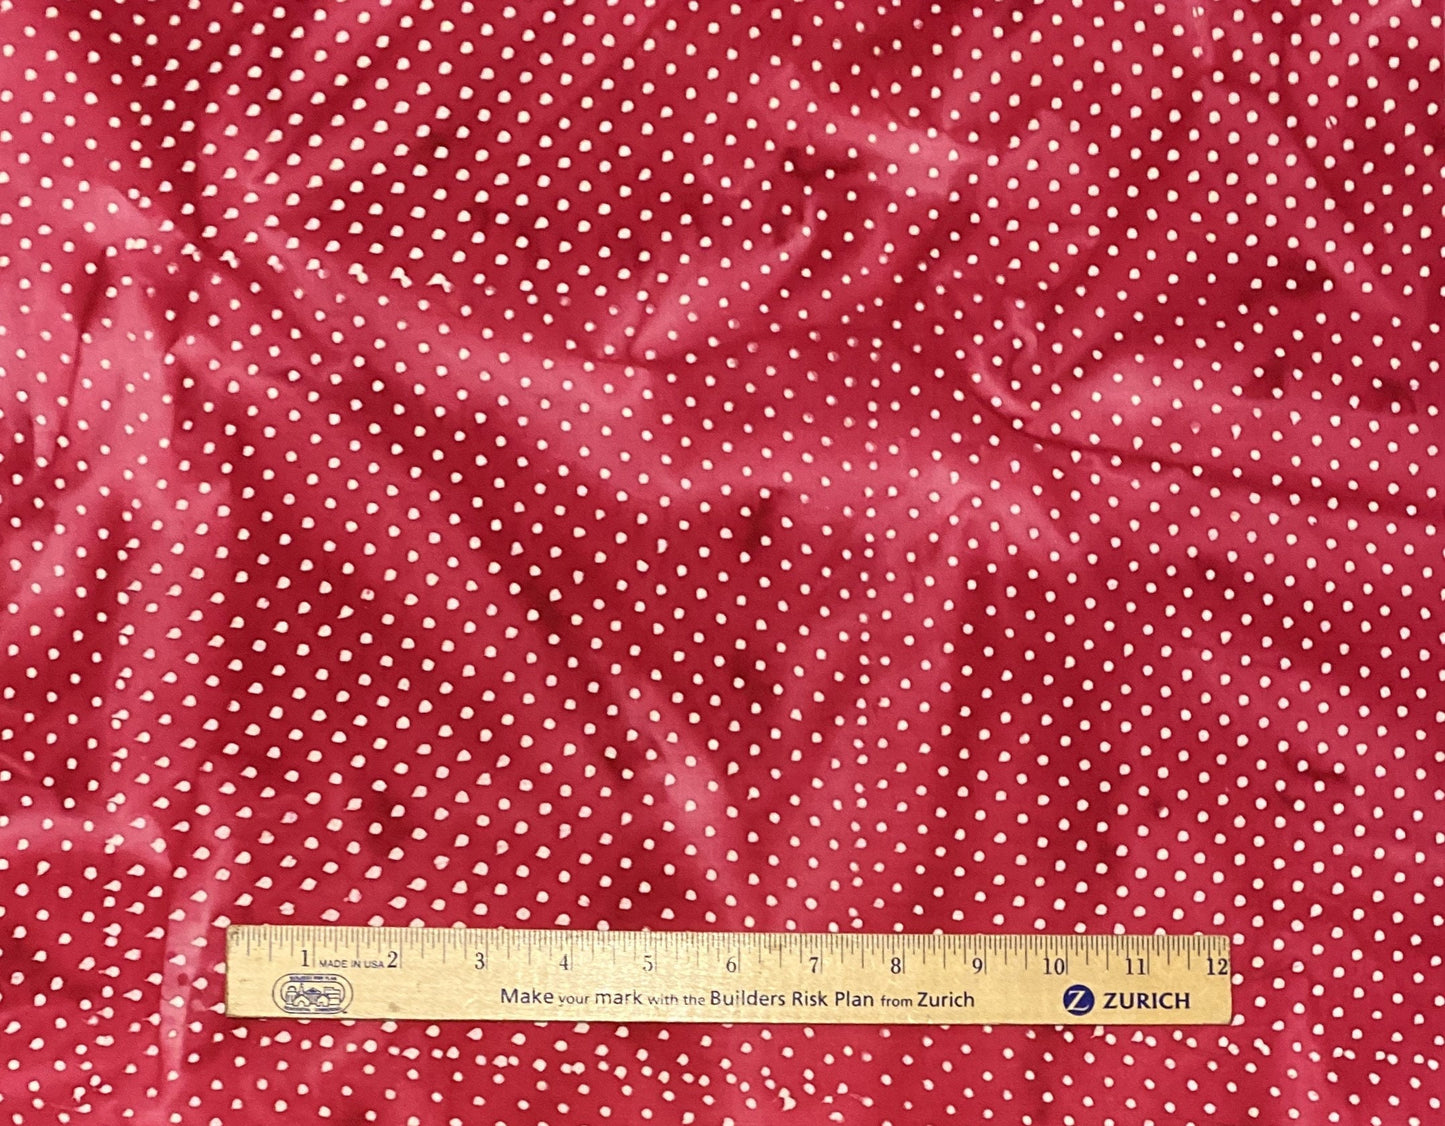 EOB - Pink and Hot Pink Watercolor Fabric - Irregular White Spots - Selvage to Selvage Print